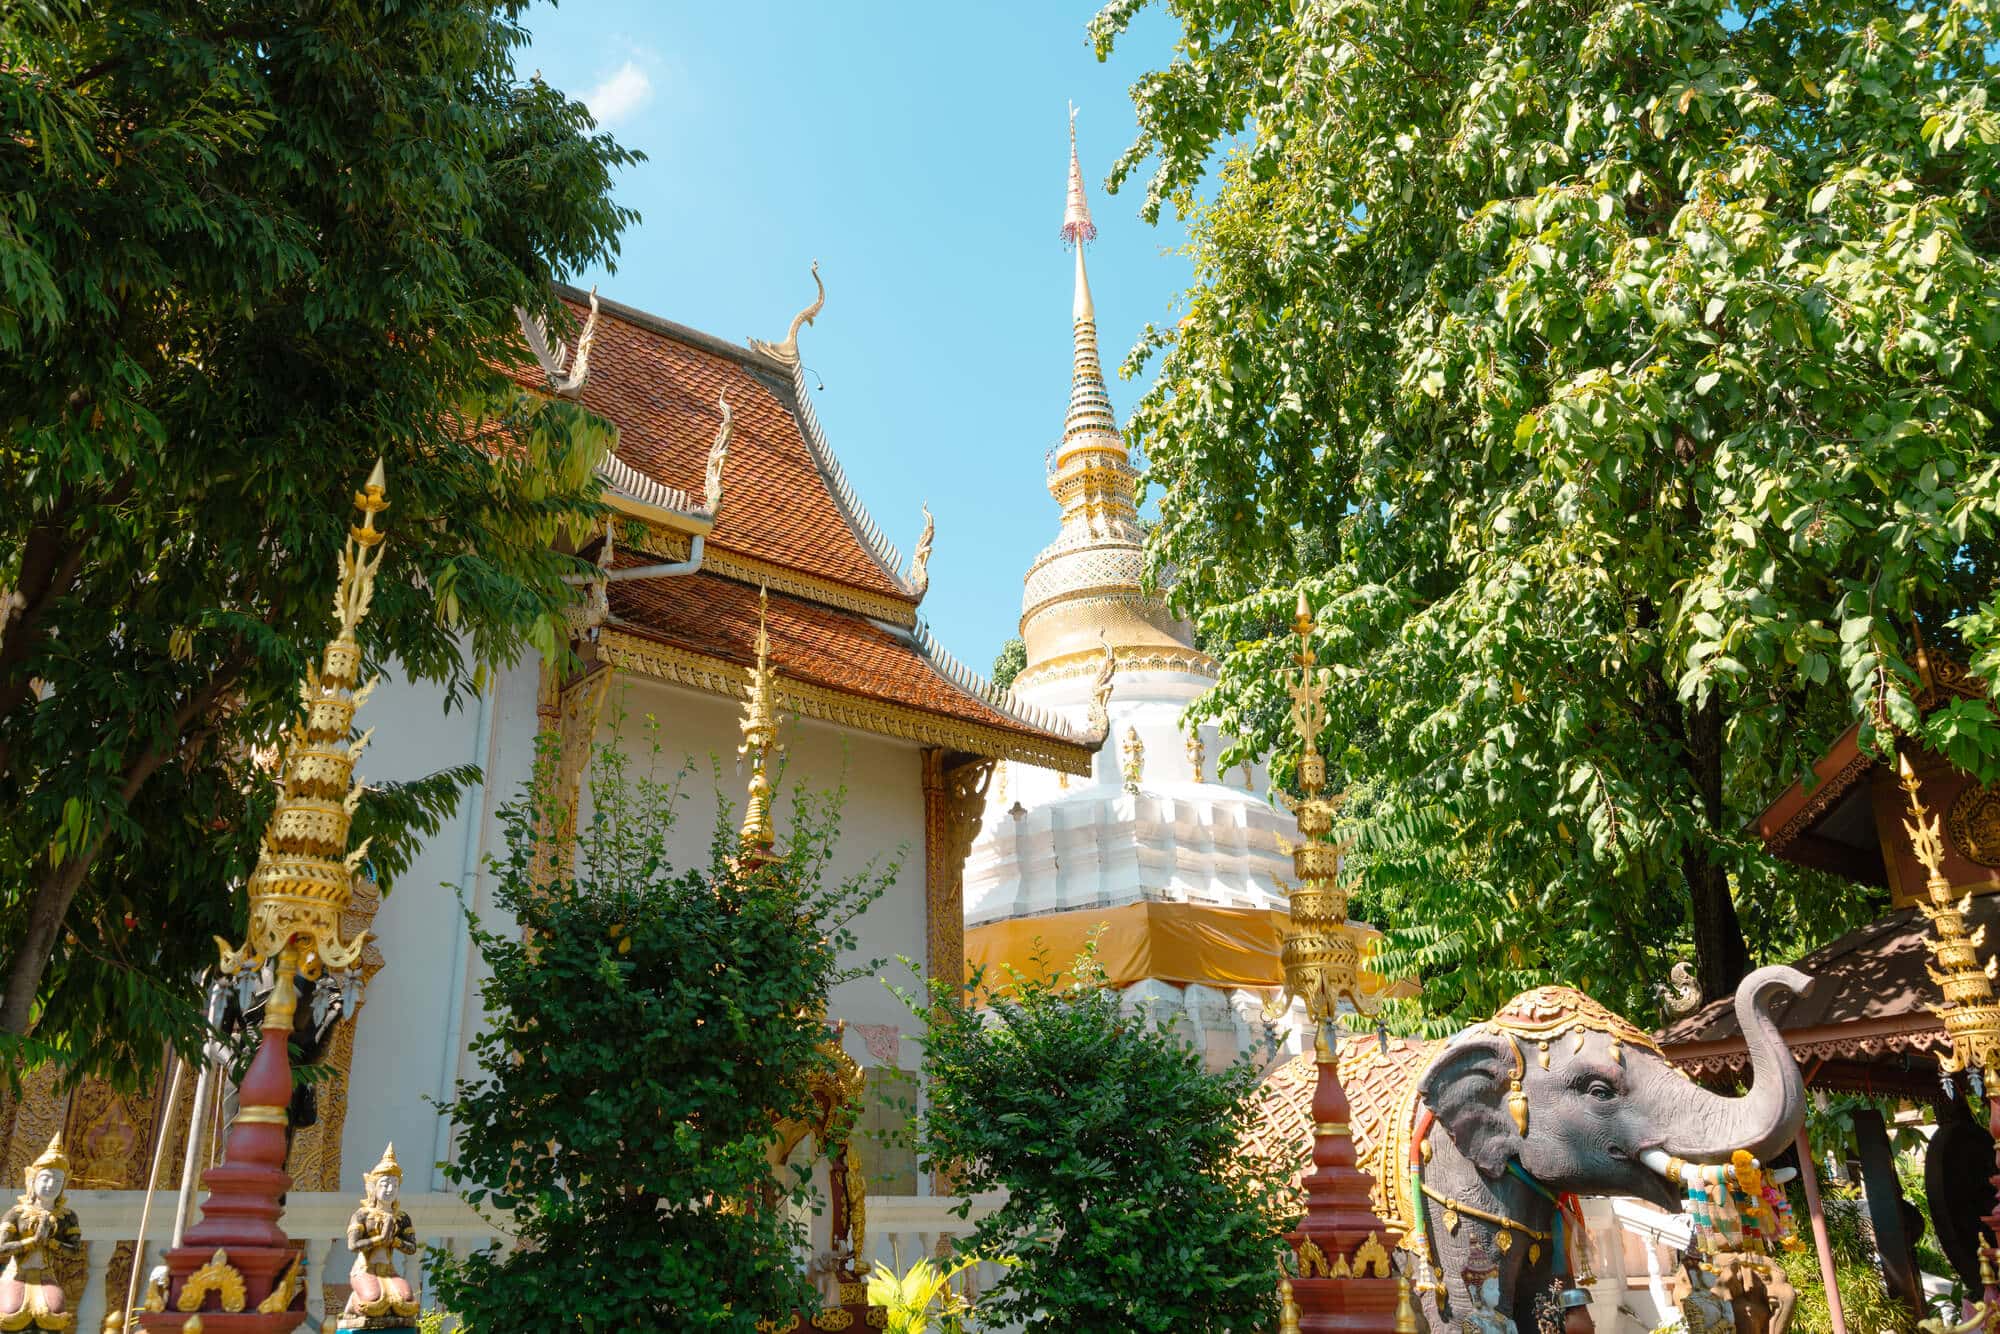 Elephant statue in front of the white Wat Lam Chang and chedi in Chiang Mai, Thailand.